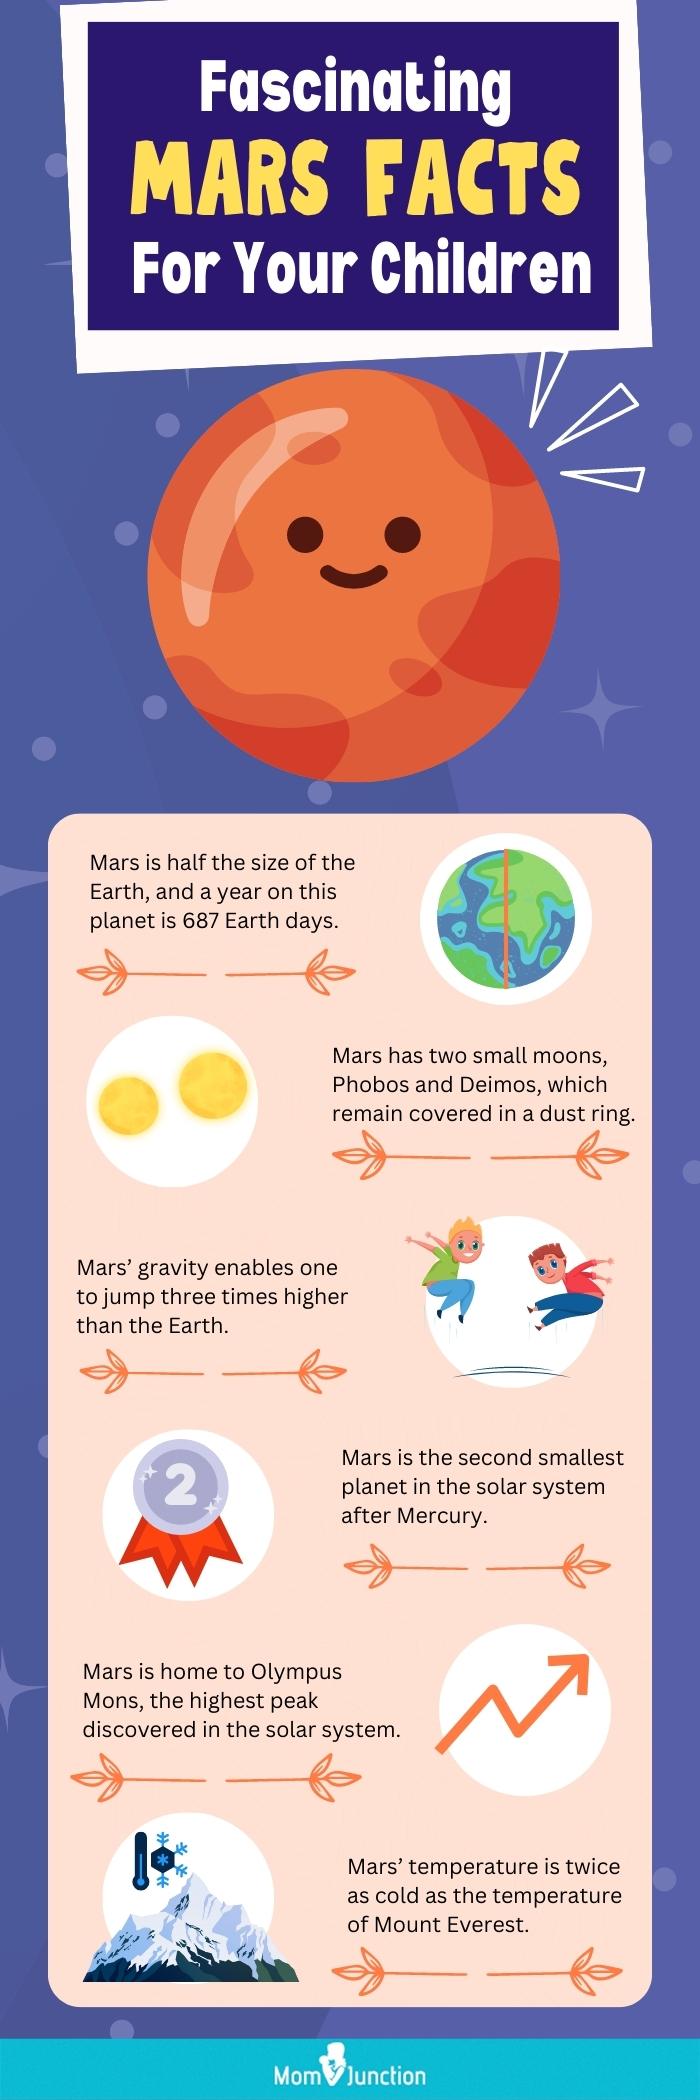 fascinating mars facts for your children (infographic)